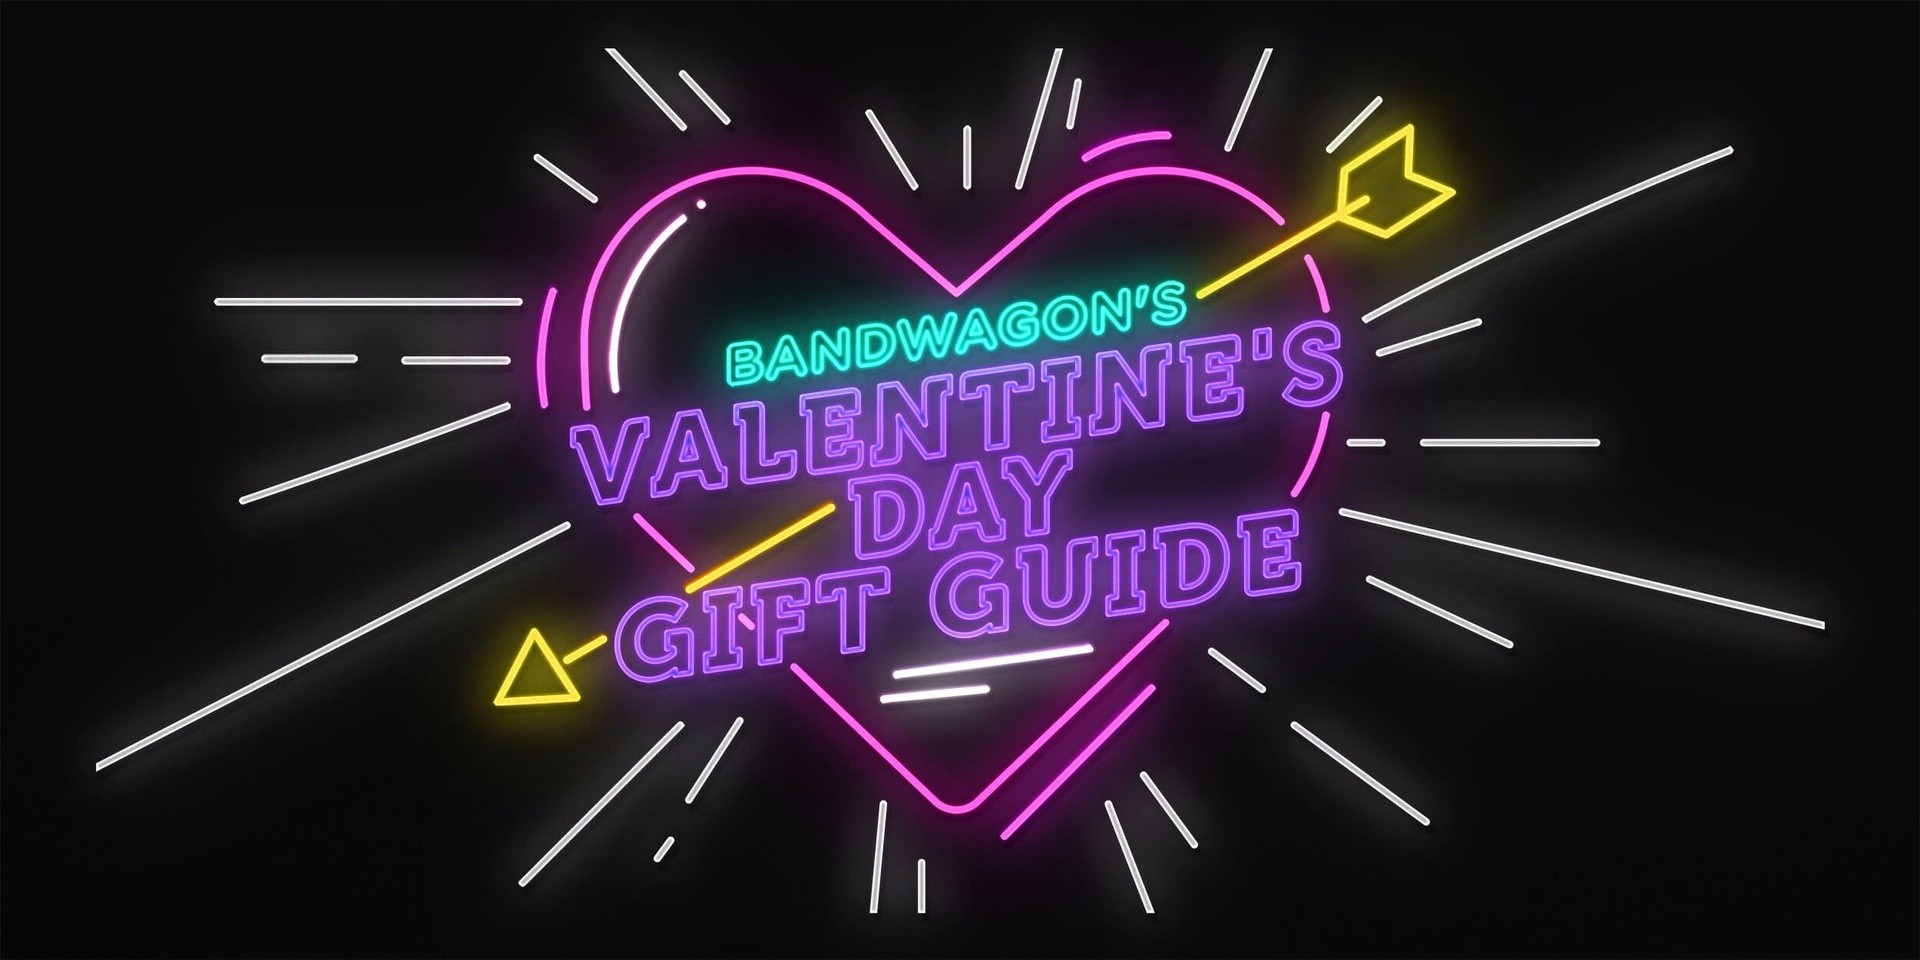 Bandwagon's Valentine's Day Gift Guide